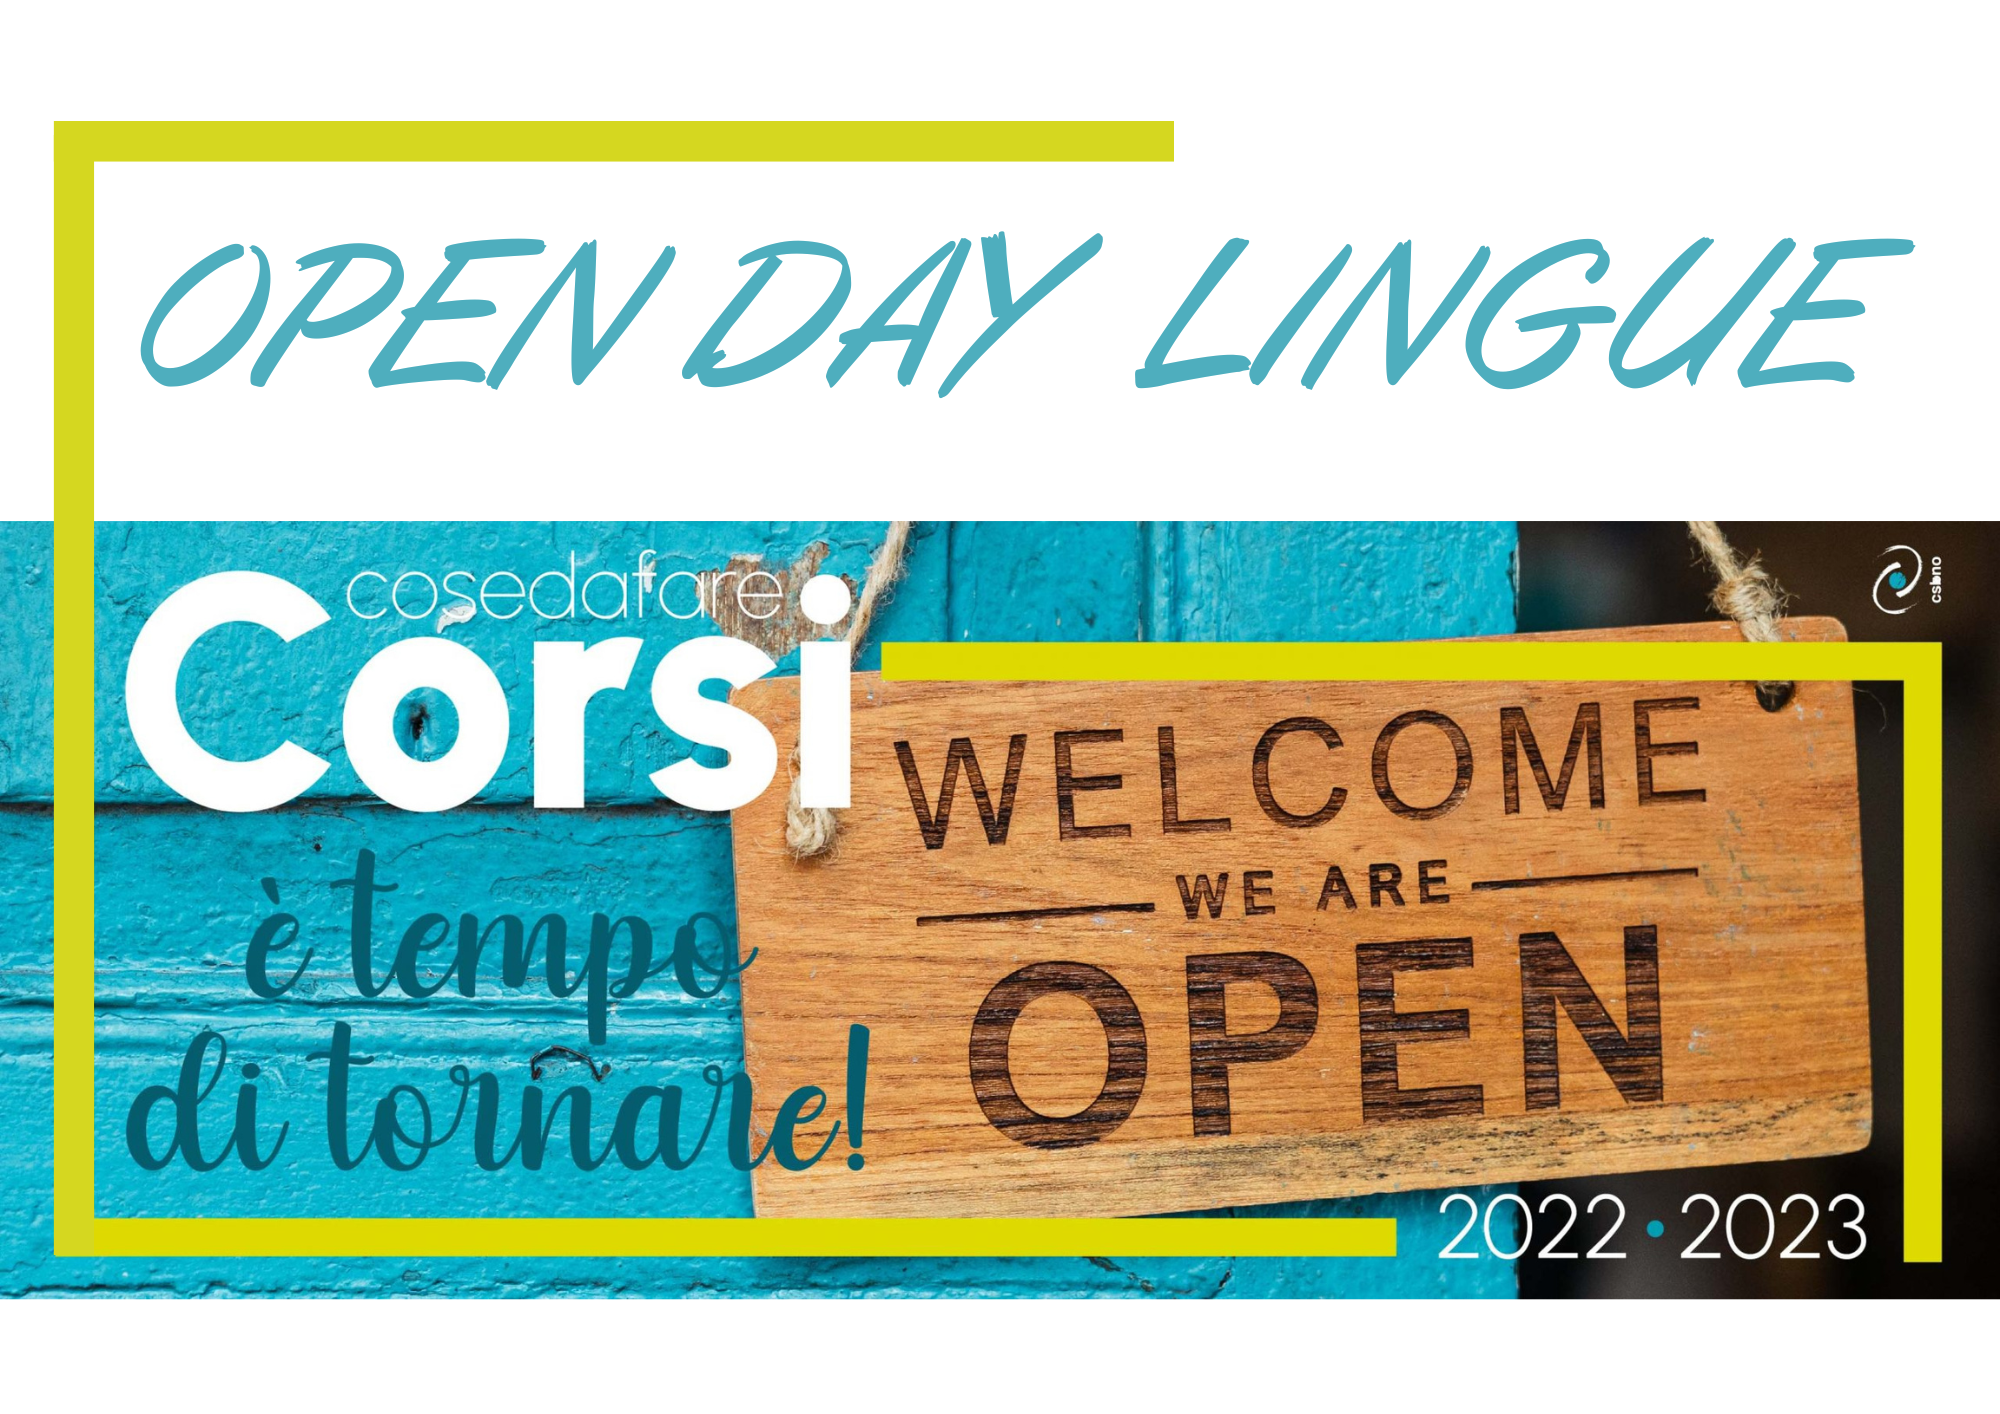 Open Day Lingue